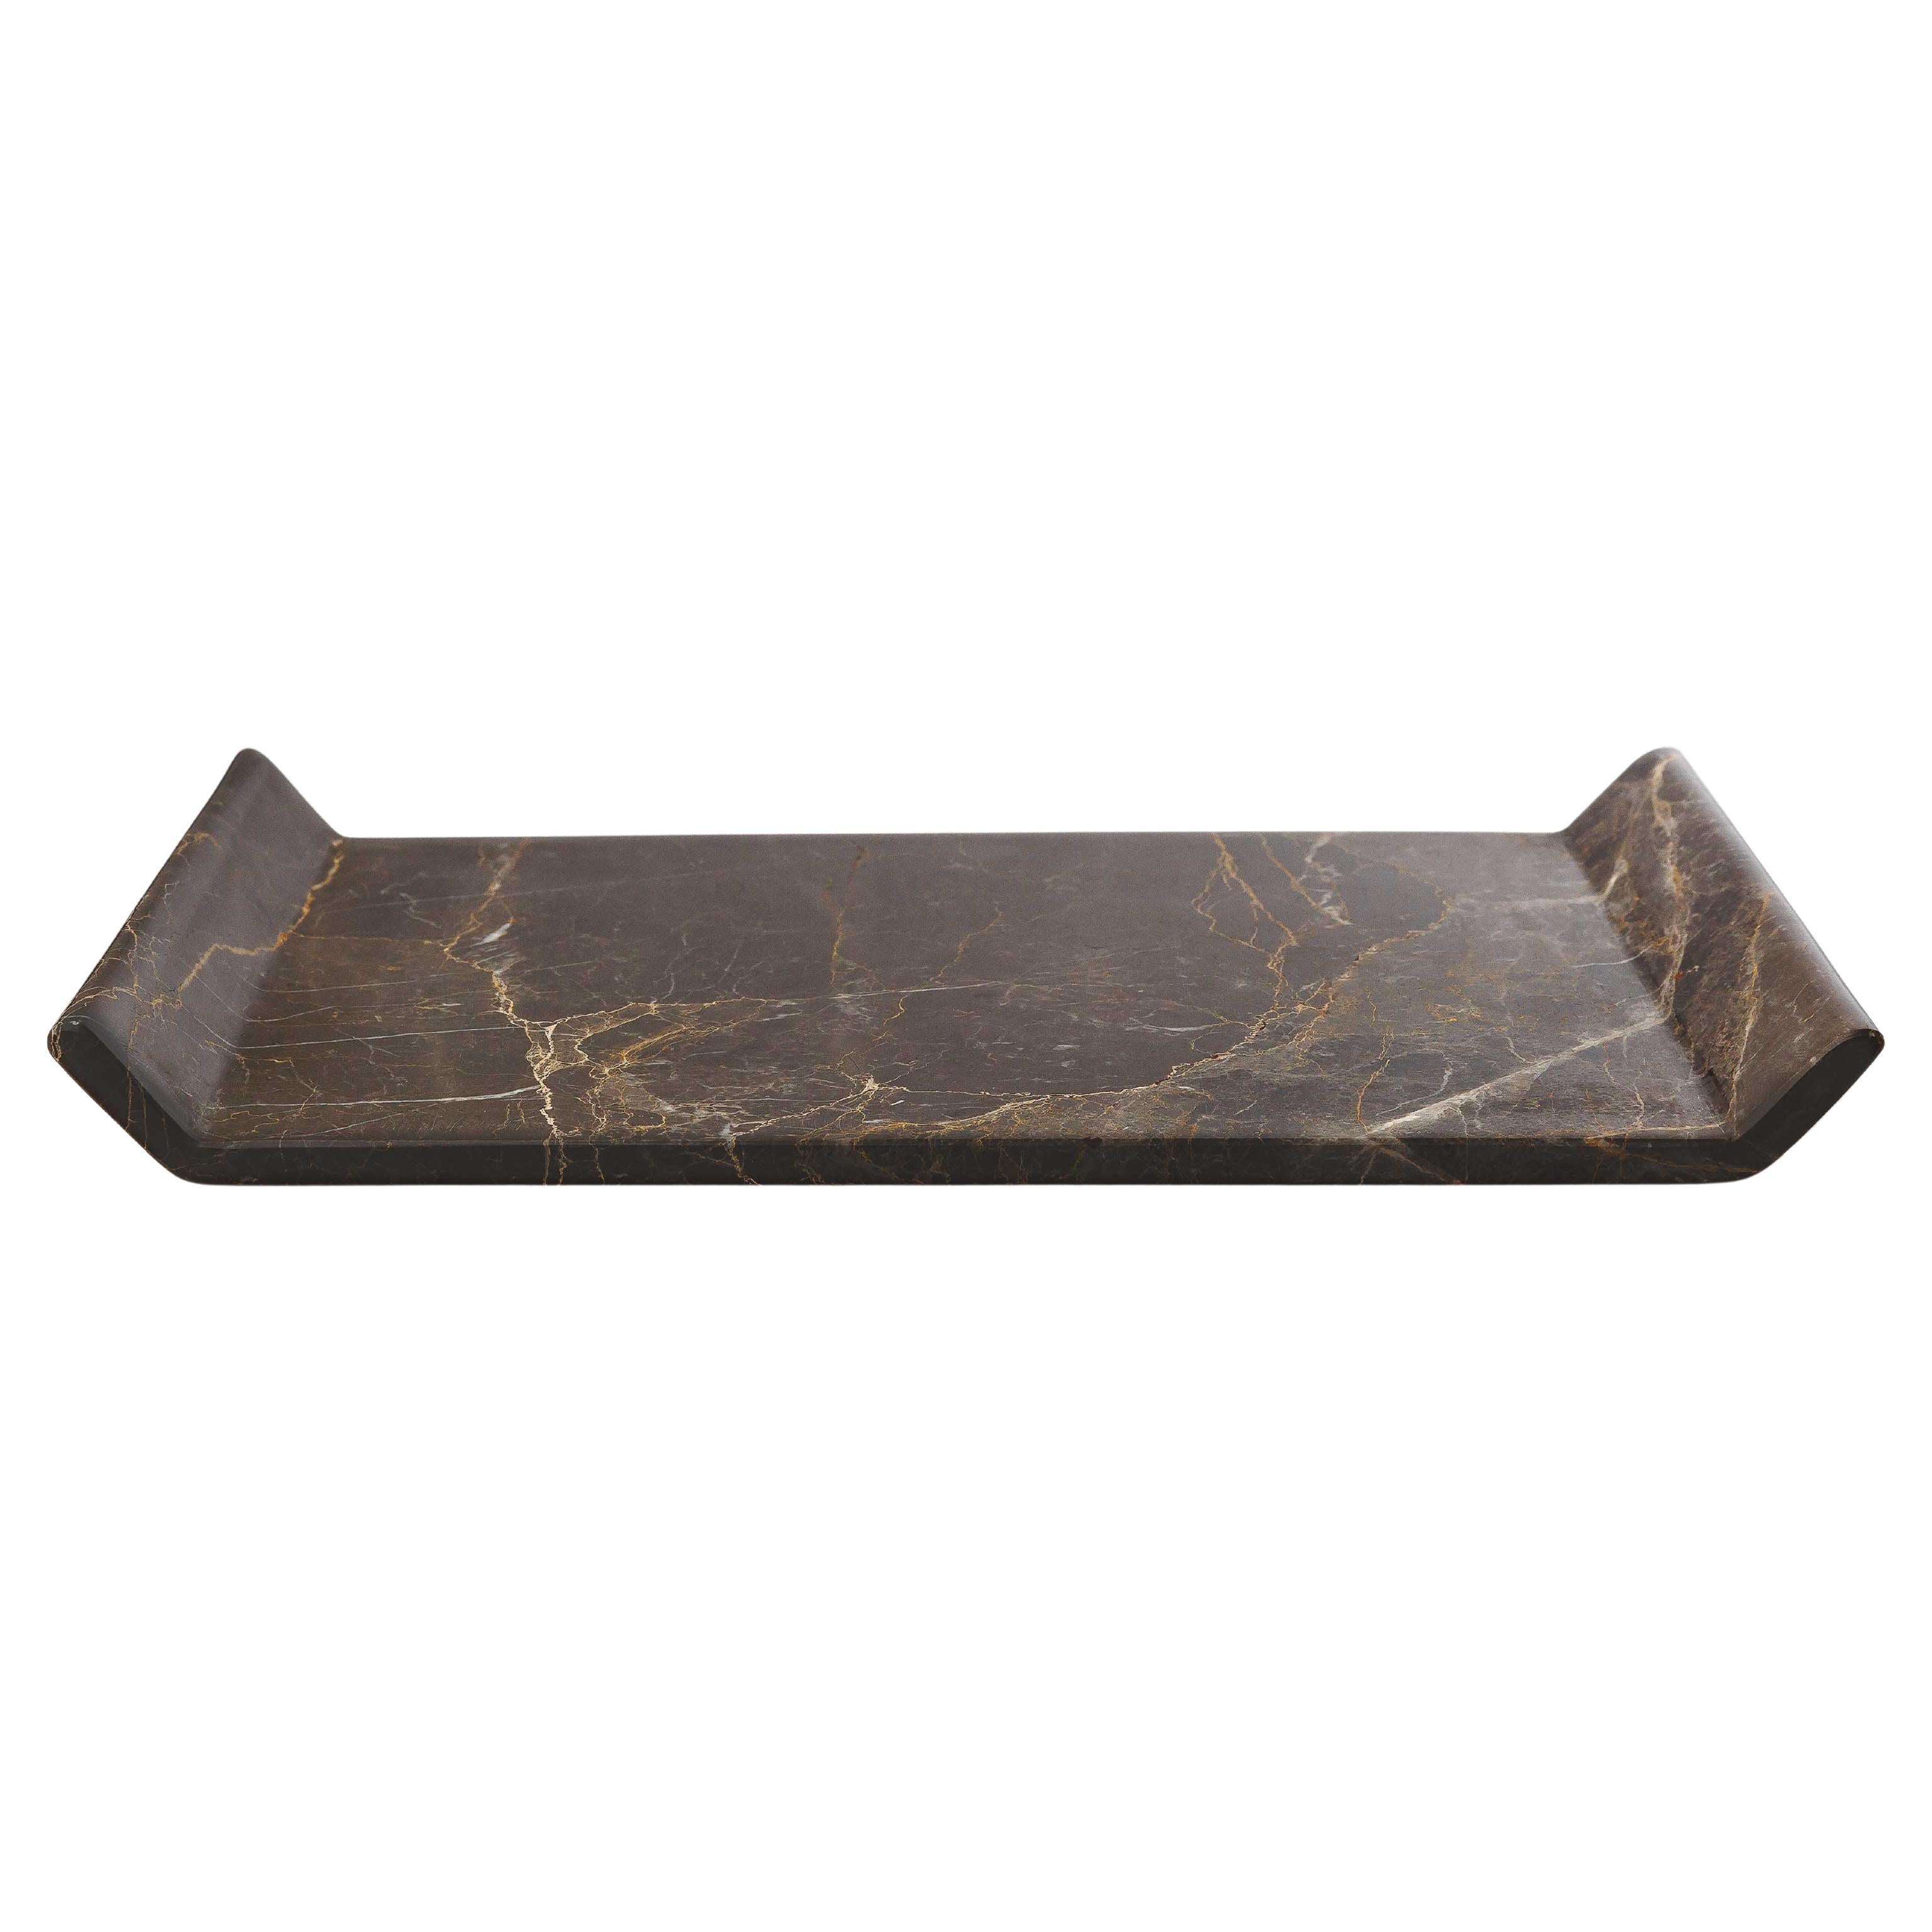 Io Marble Platter by On.Entropy in Brown, Modern Desk Accessory